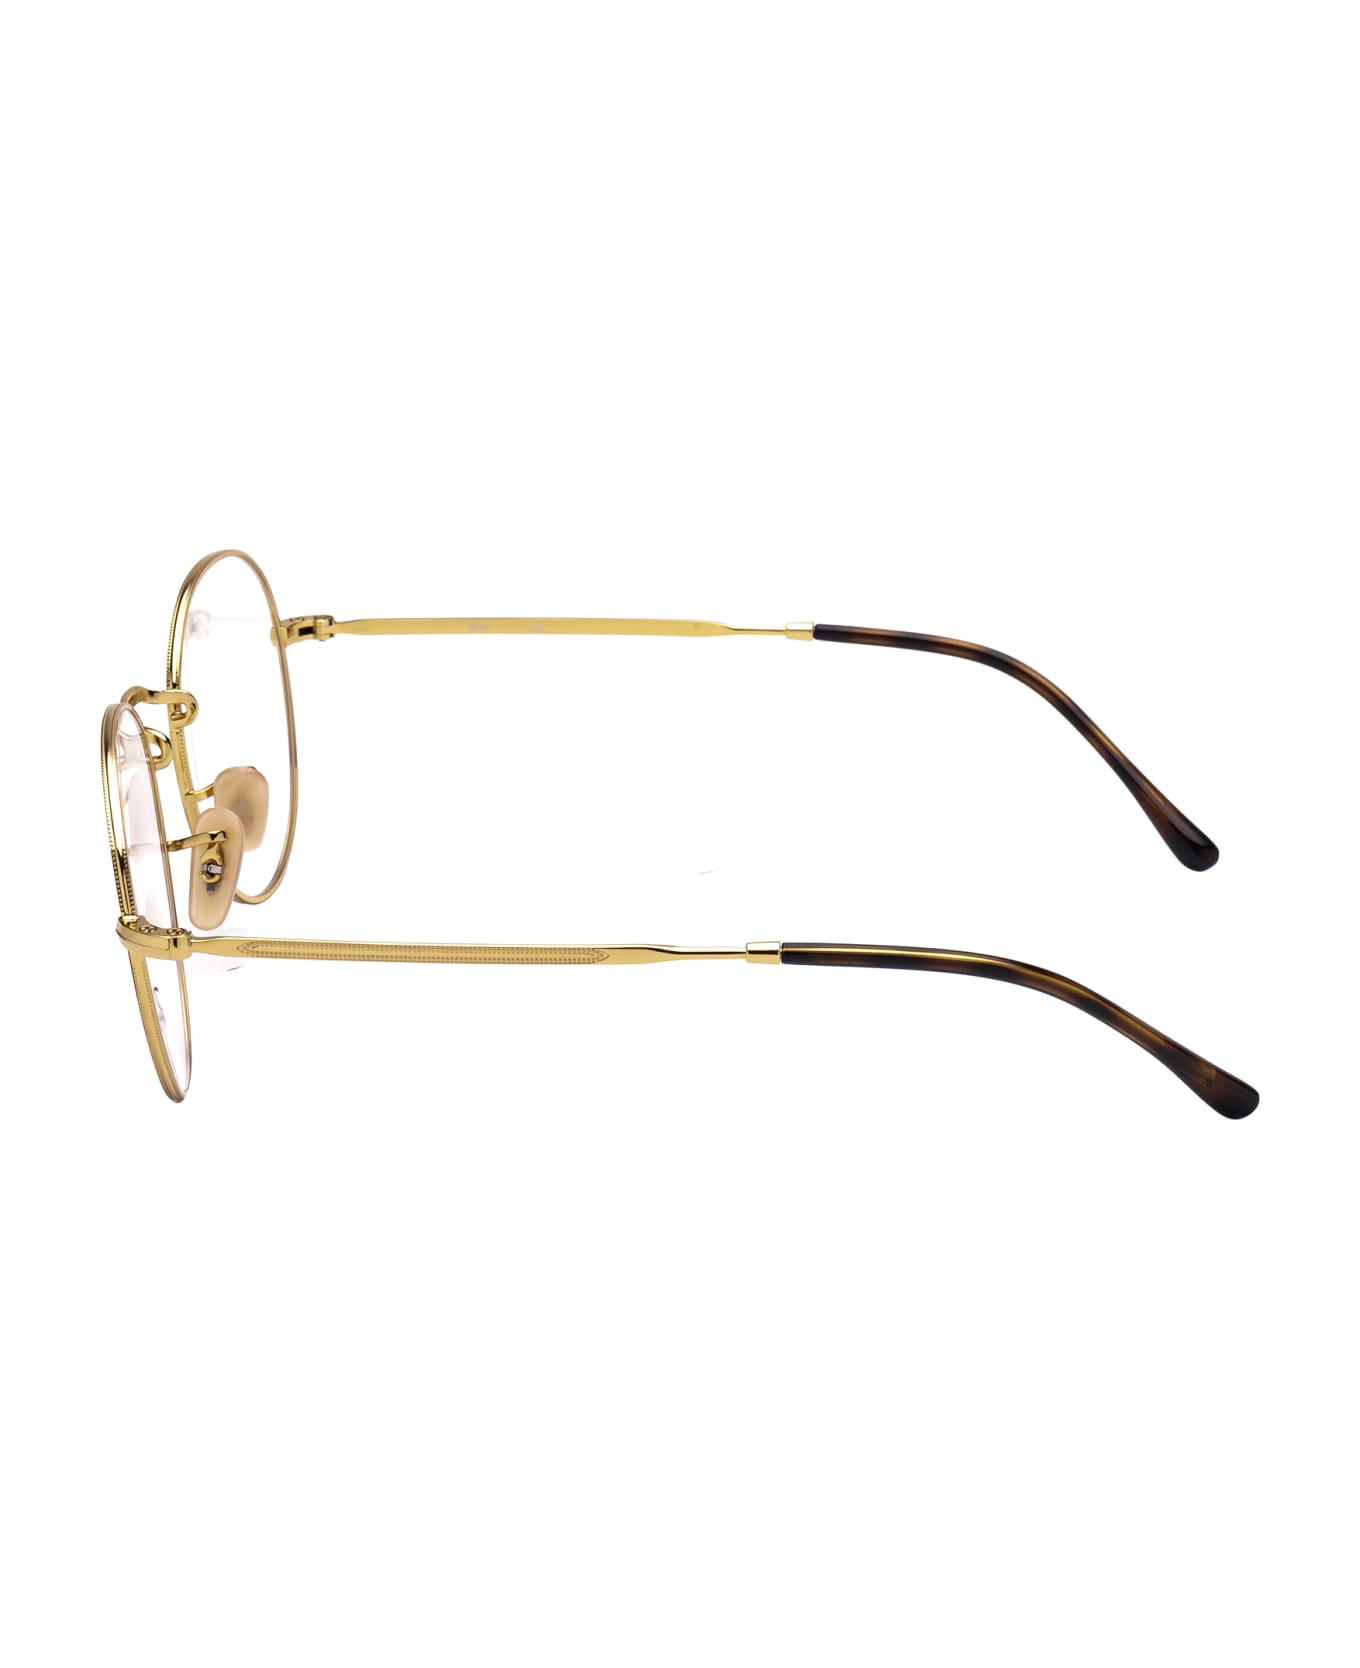 Ray-Ban David Glasses - 2945 Import duties included, as applicable